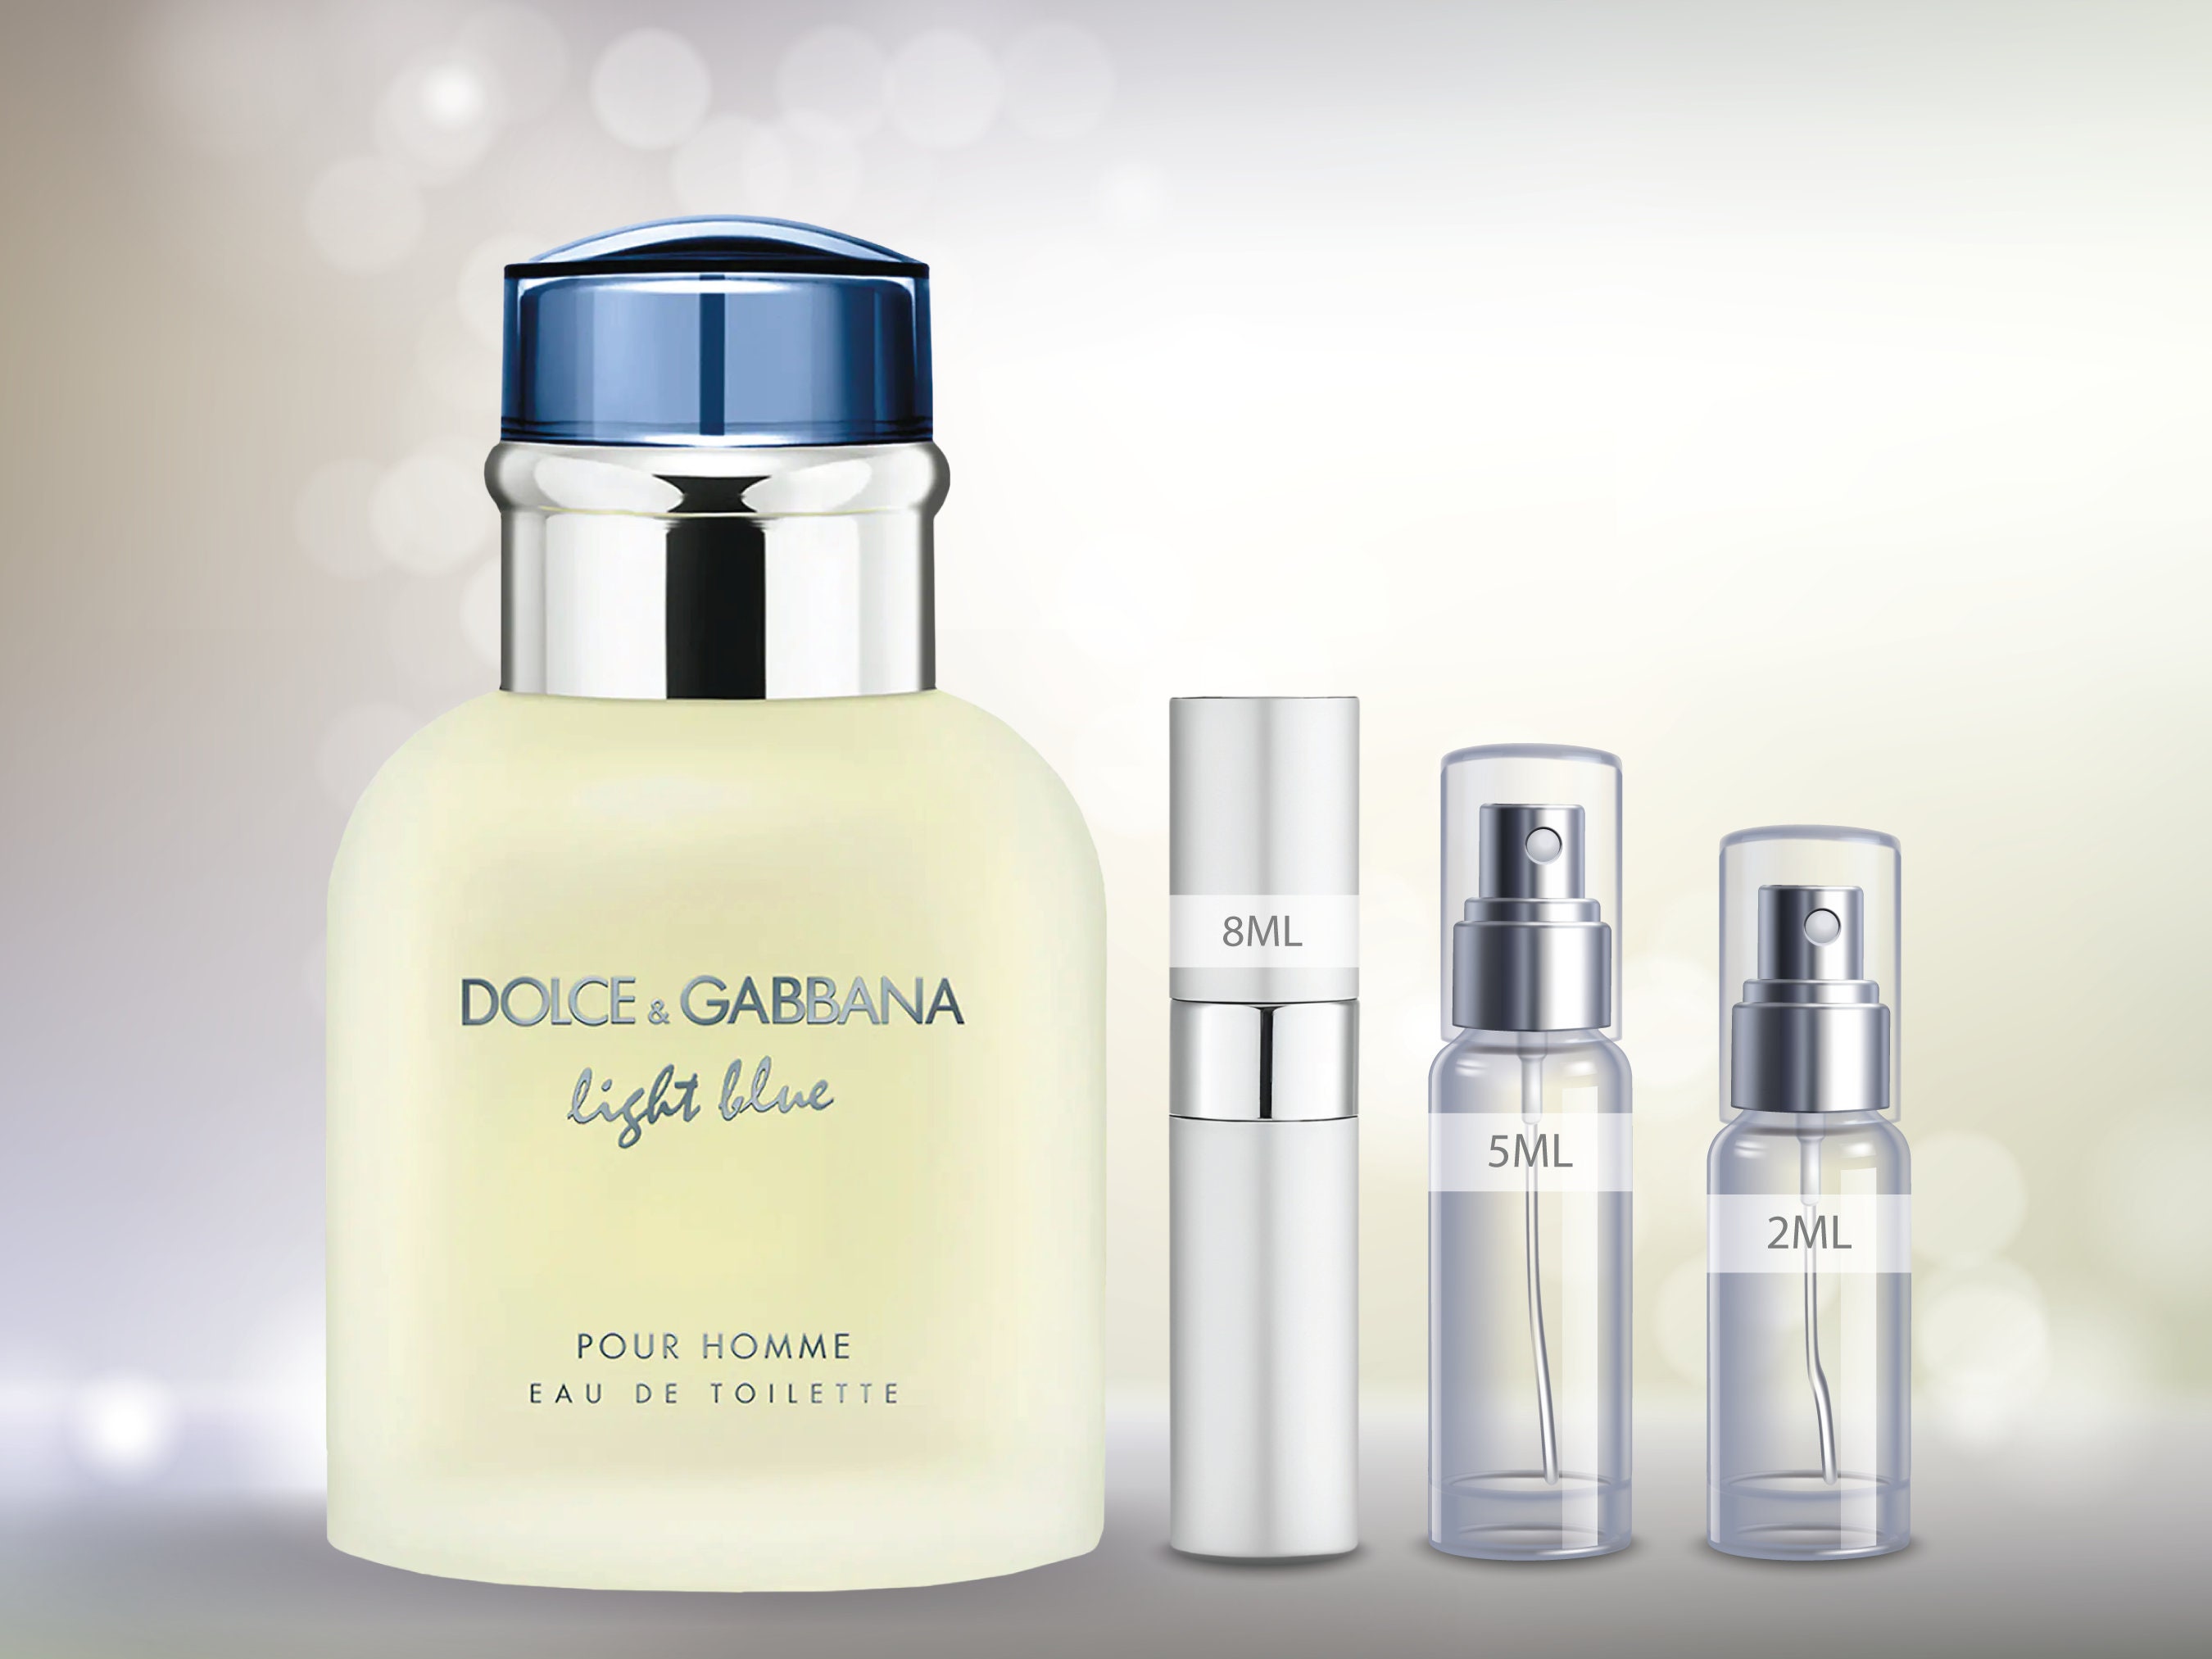 Light Blue EDT from Dolce and Gabbana